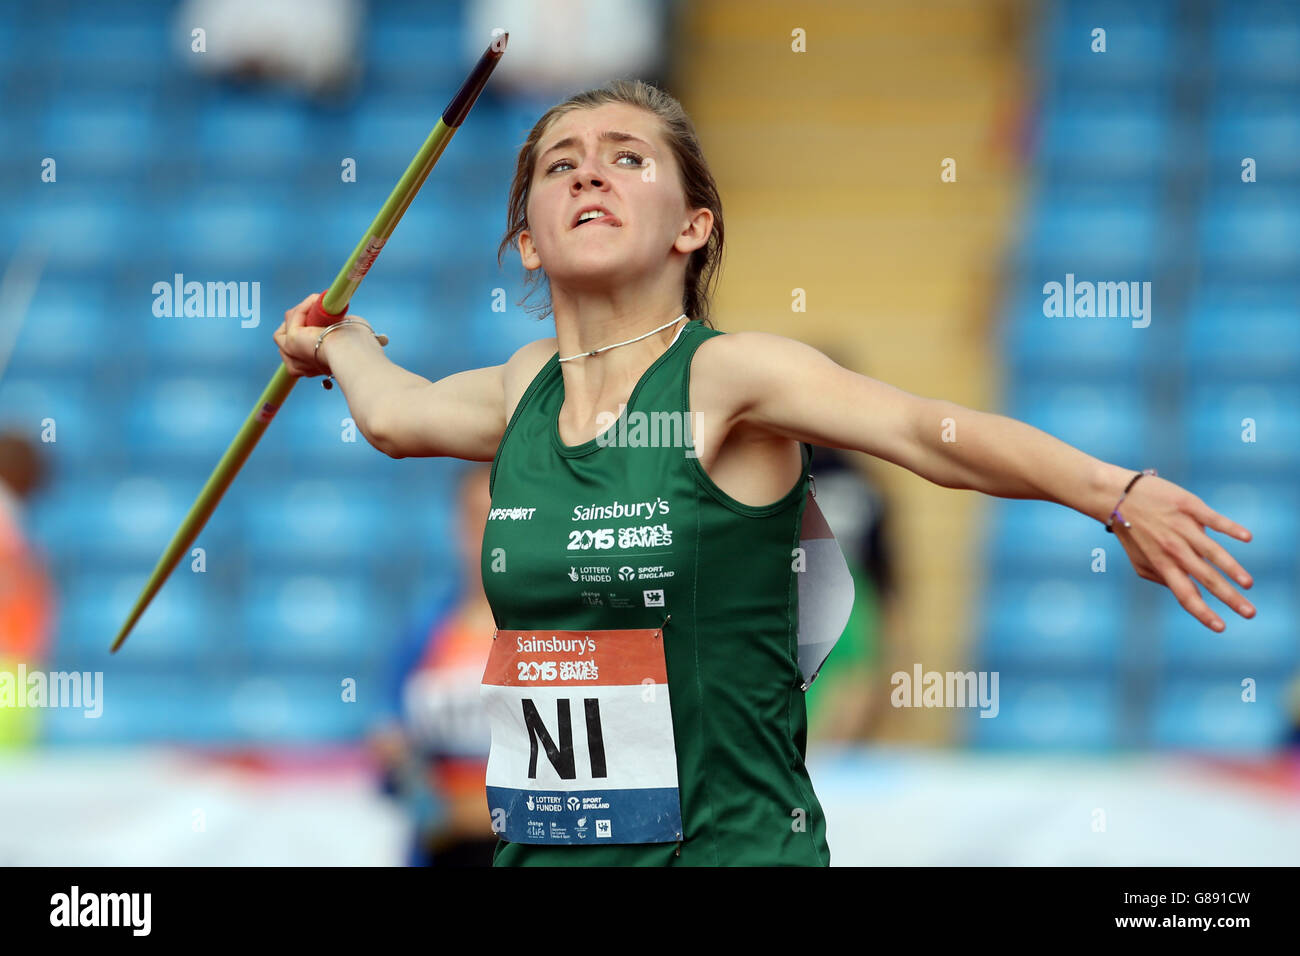 Sport - Sainsbury's 2015 School Games - Day Two - Manchester. Northern Ireland's Hollie Gilliand takes part in the girls javelin at the Sainsbury's 2015 School Games at the Manchester Regional Arena. Stock Photo